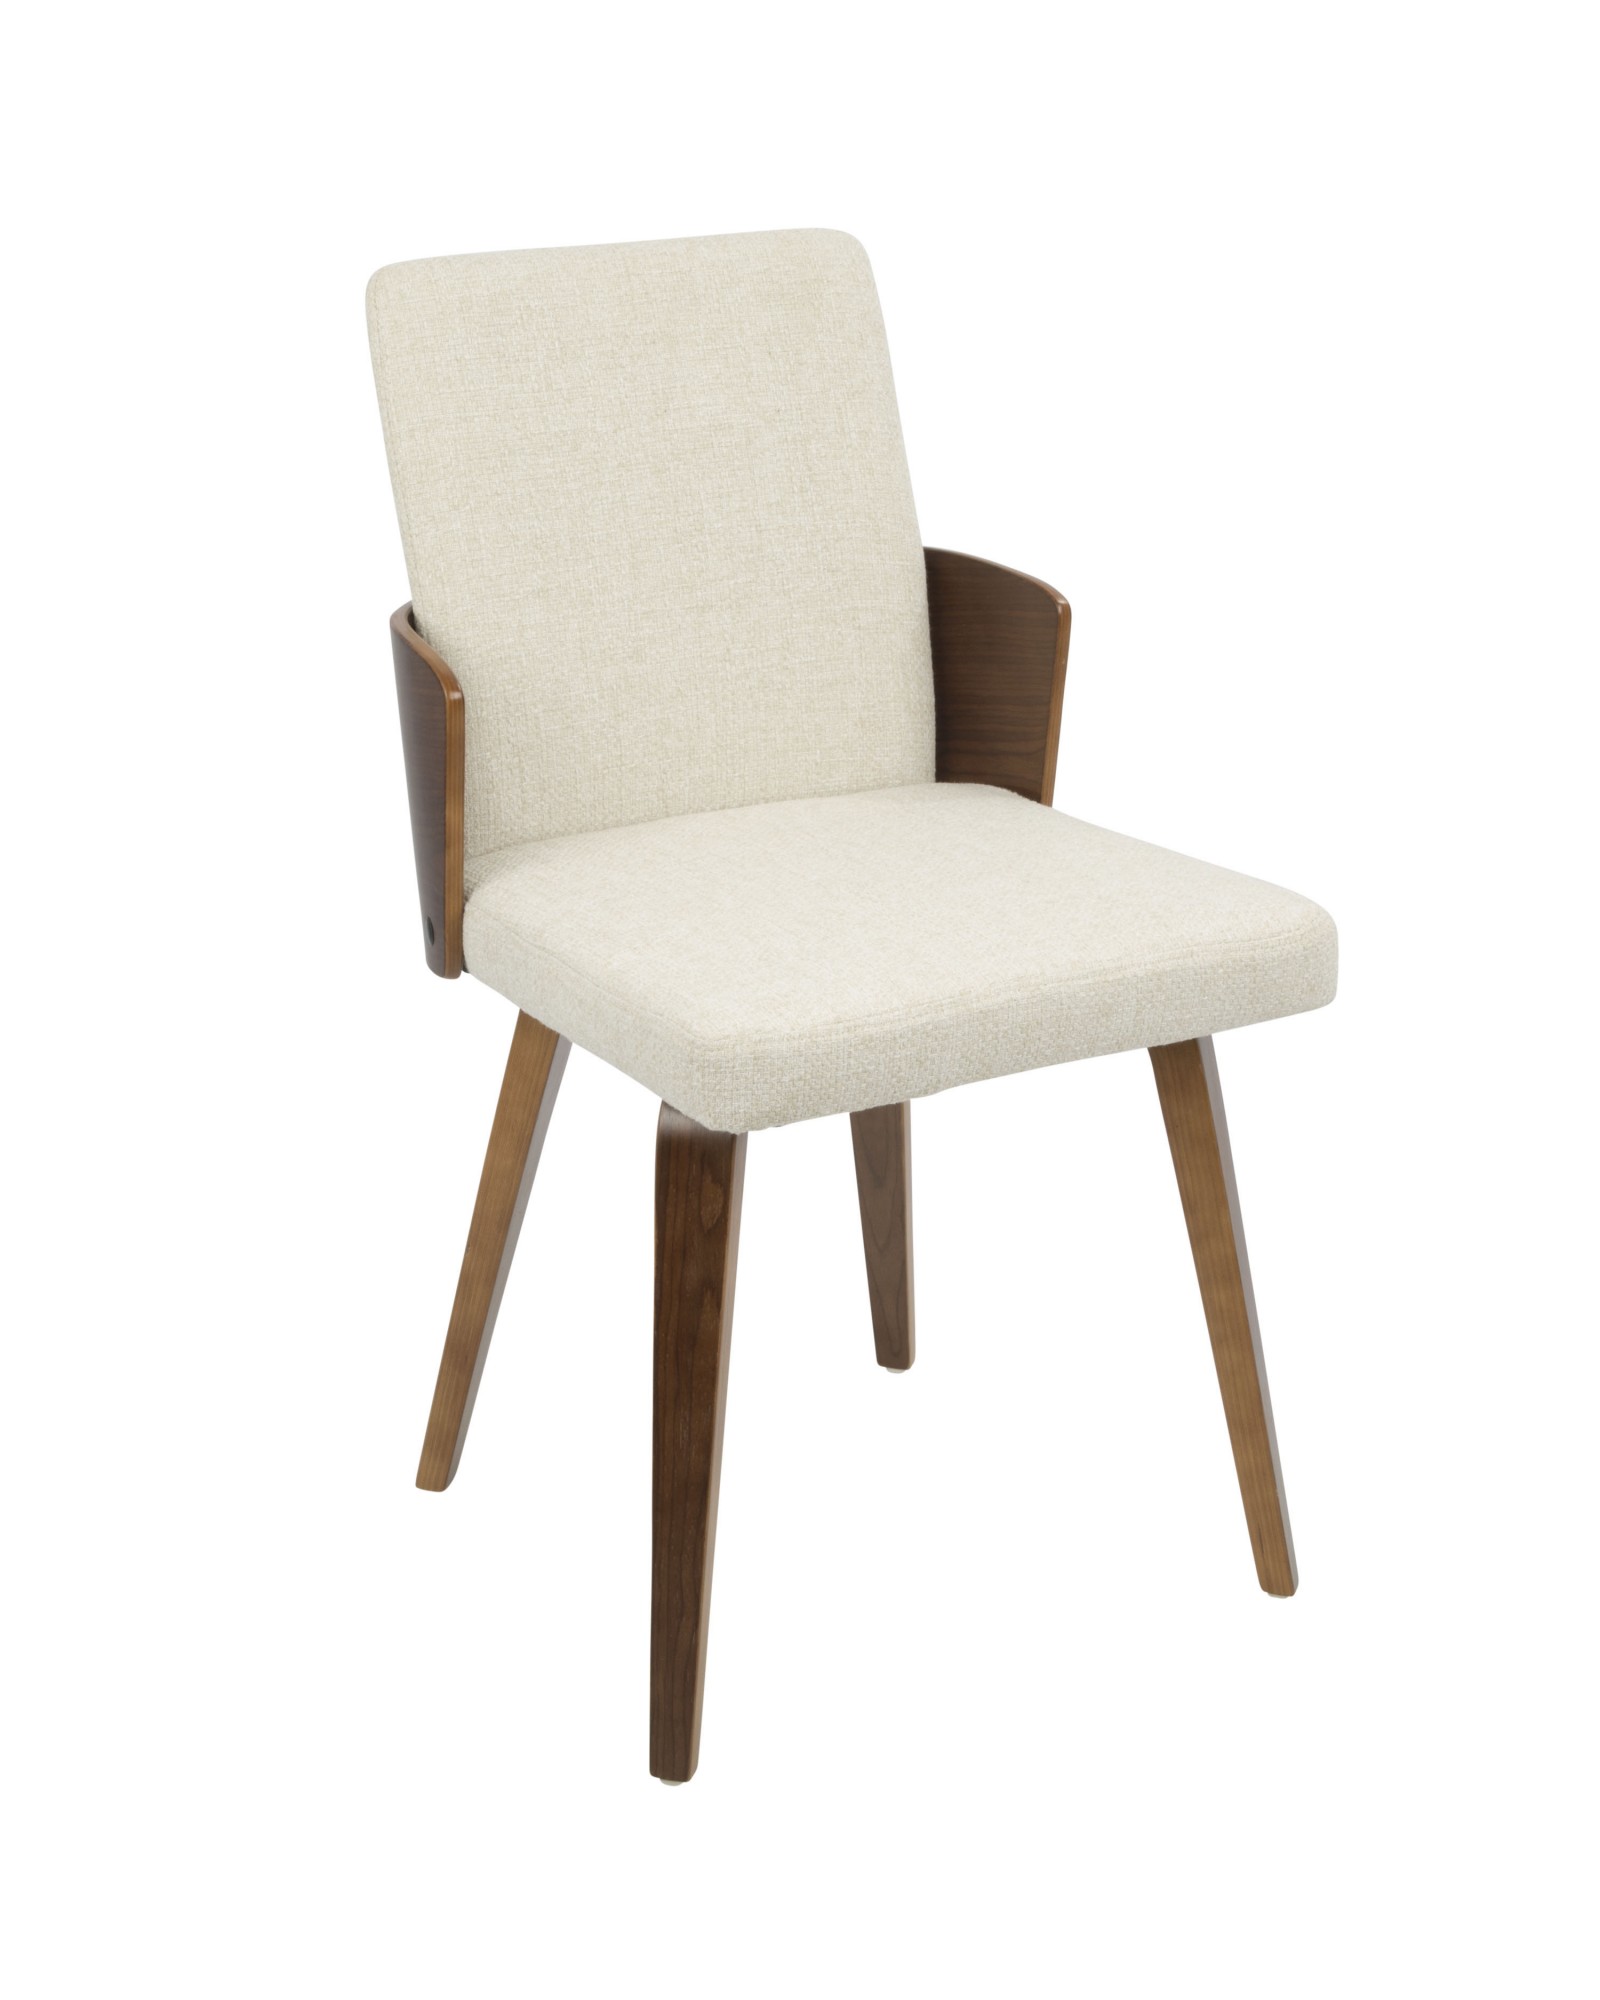 Carmella Mid-Century Modern Dining/Accent Chair in Walnut and Cream Fabric - Set of 2